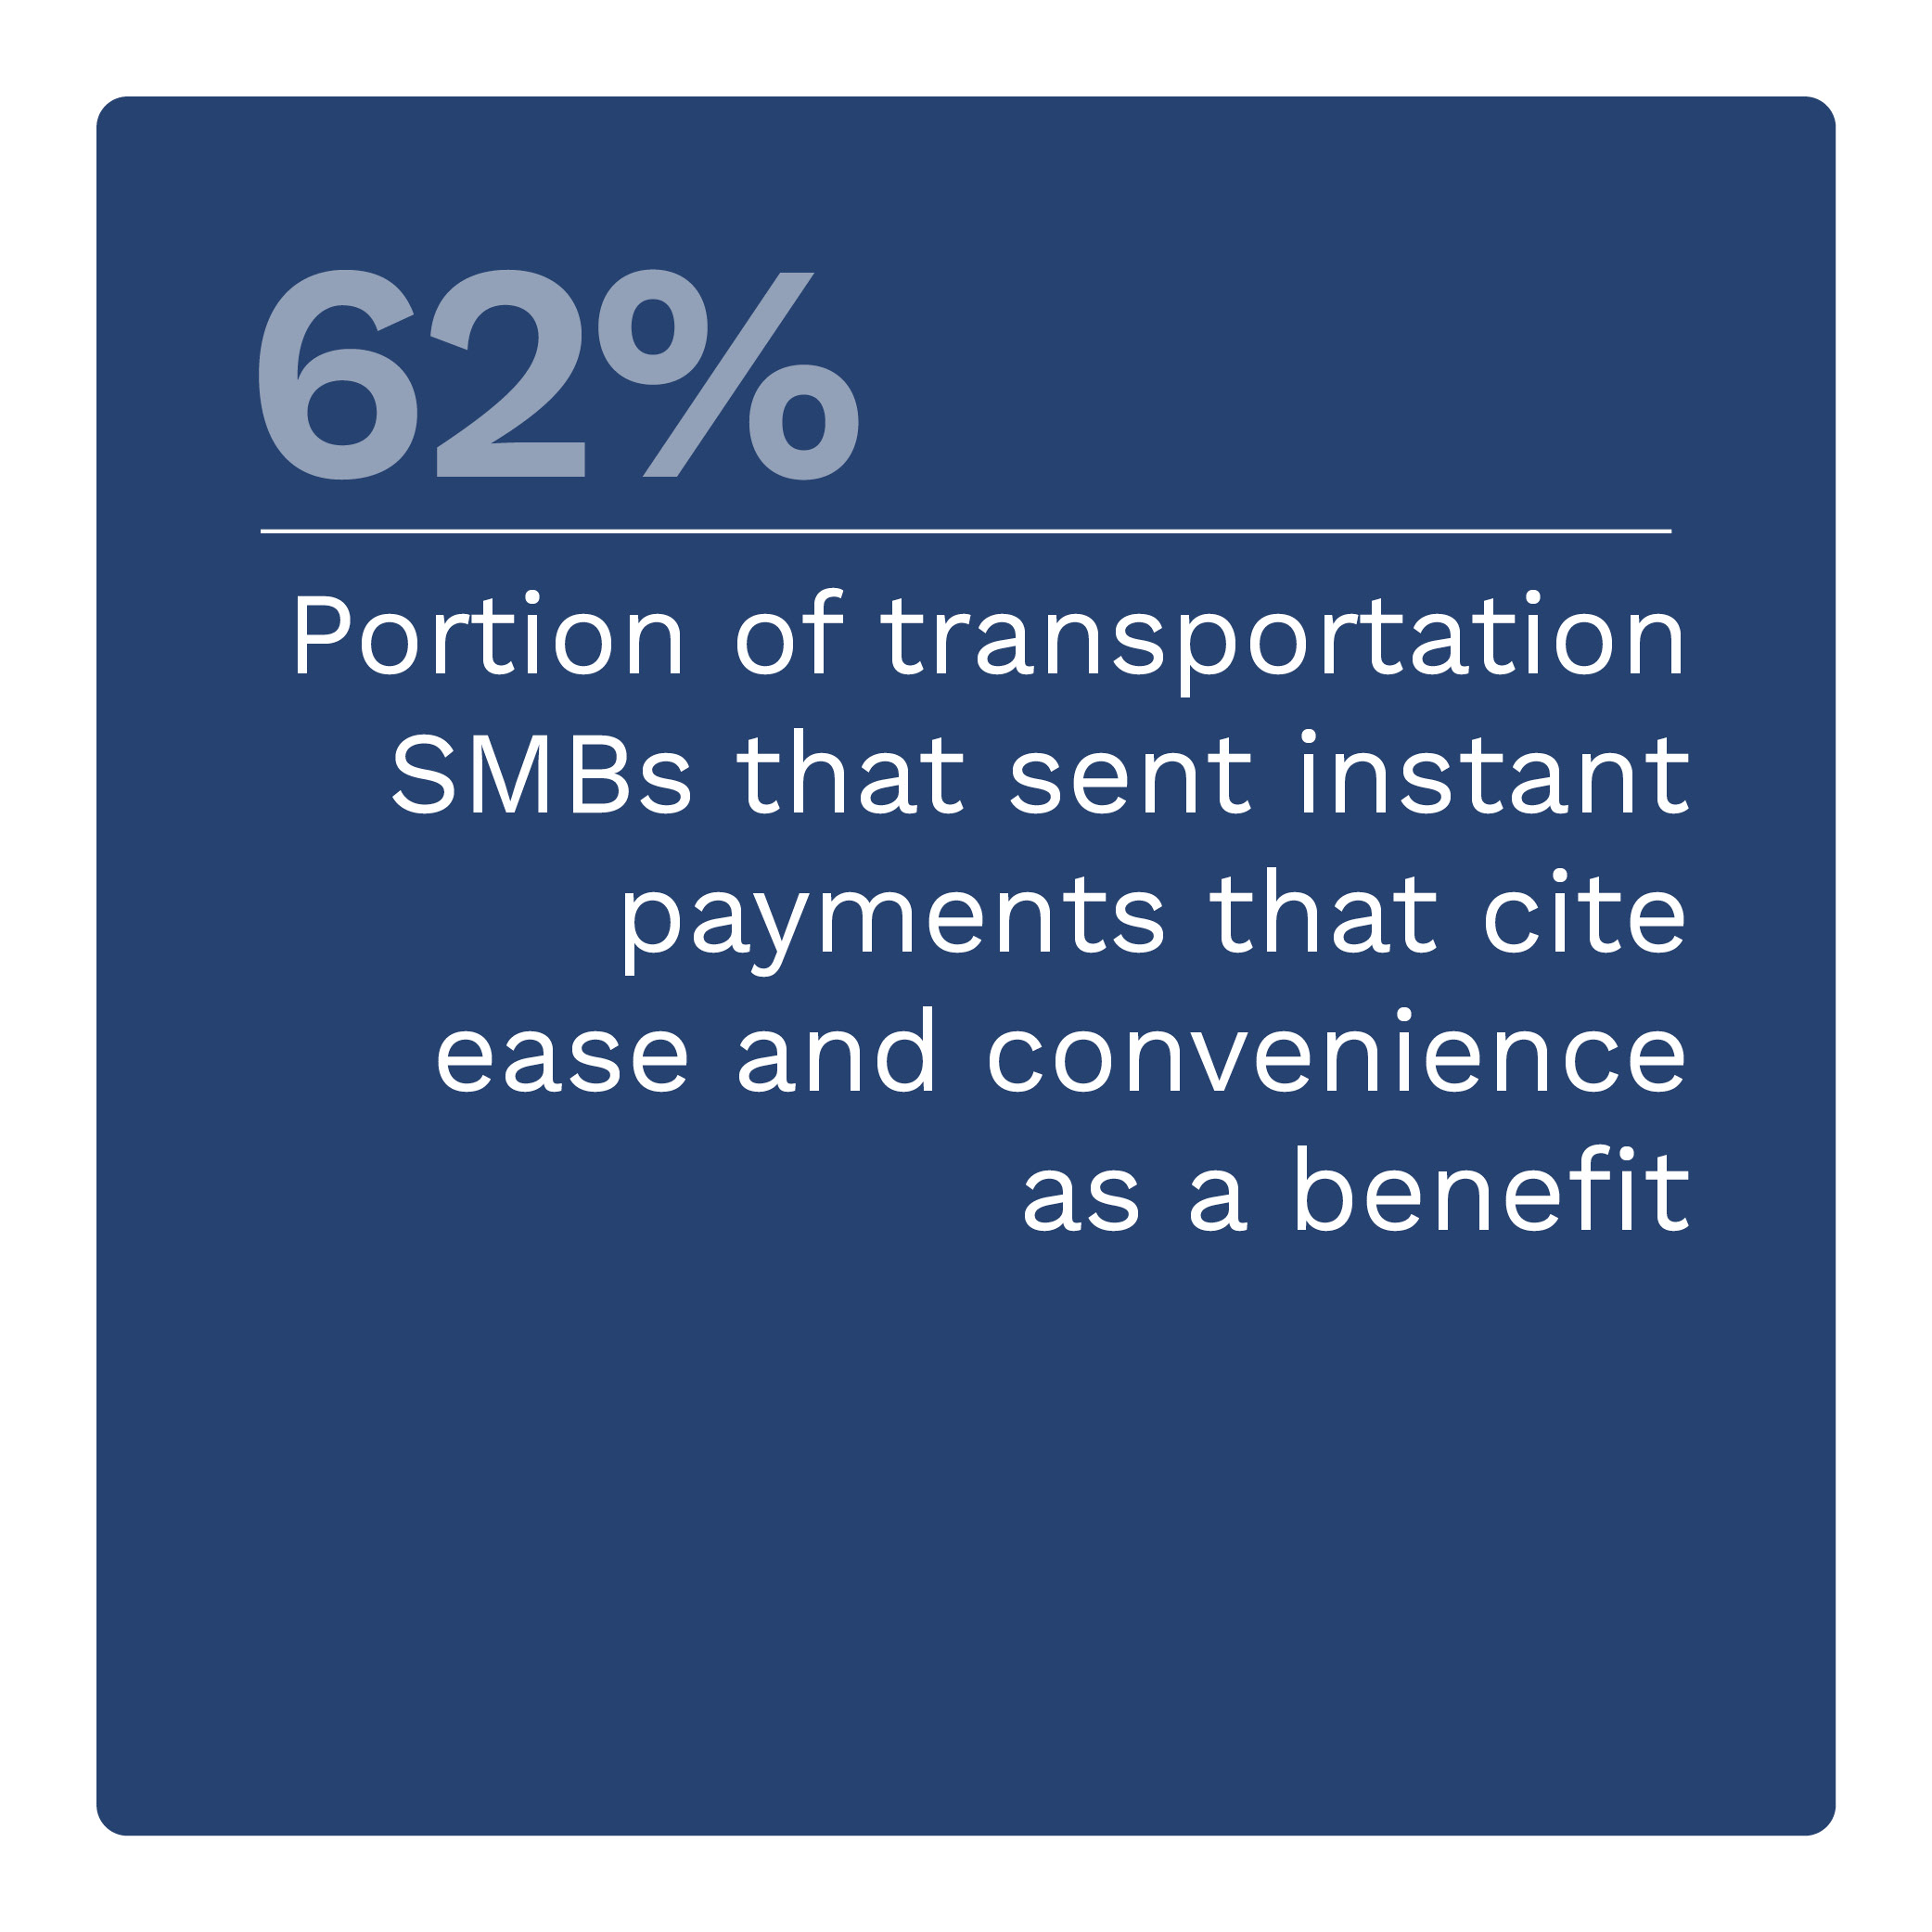  Portion of transportation SMBs that sent instant payments that cite ease and convenience as a benefit 